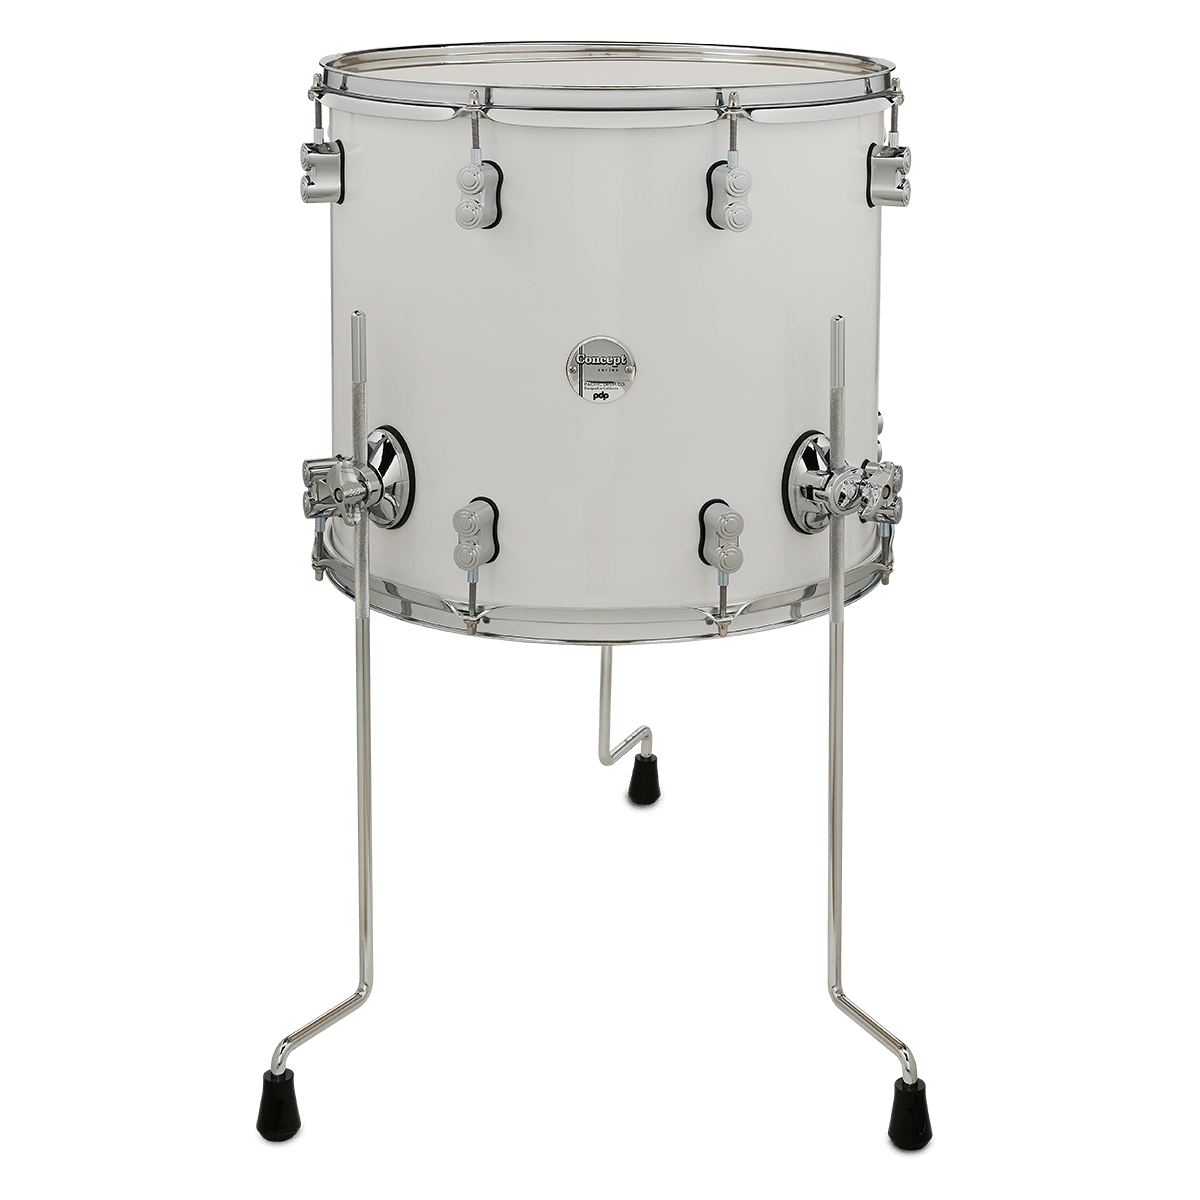 PDP PDCM2215PW Concept Maple Shell Pack Pearlescent White Lacquer 5-piece Drum Kit